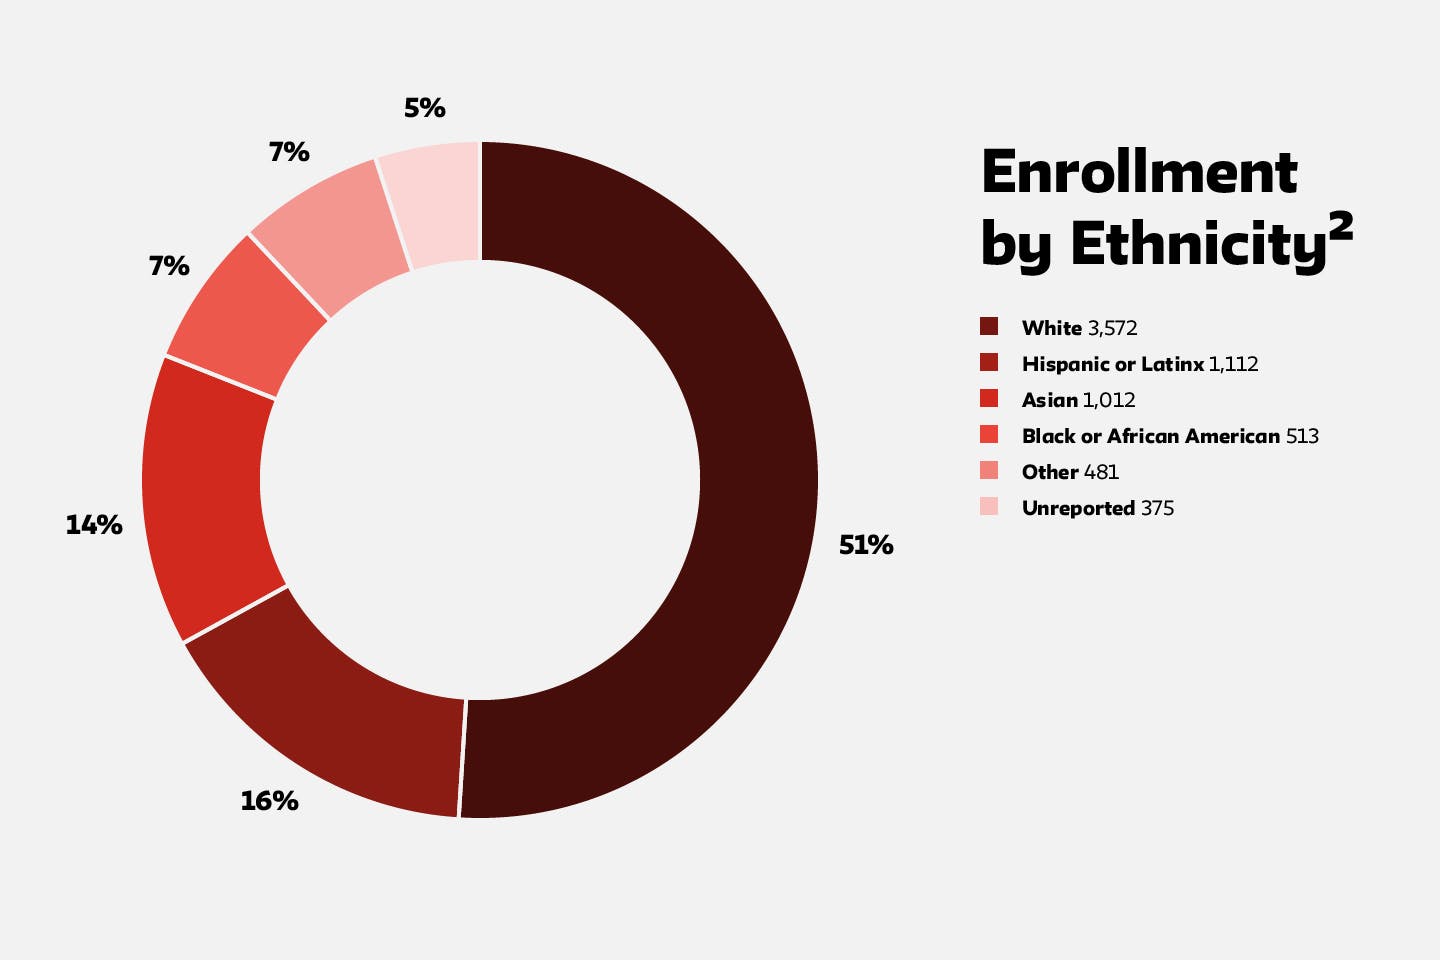 Enrollment by Ethnicity 2021